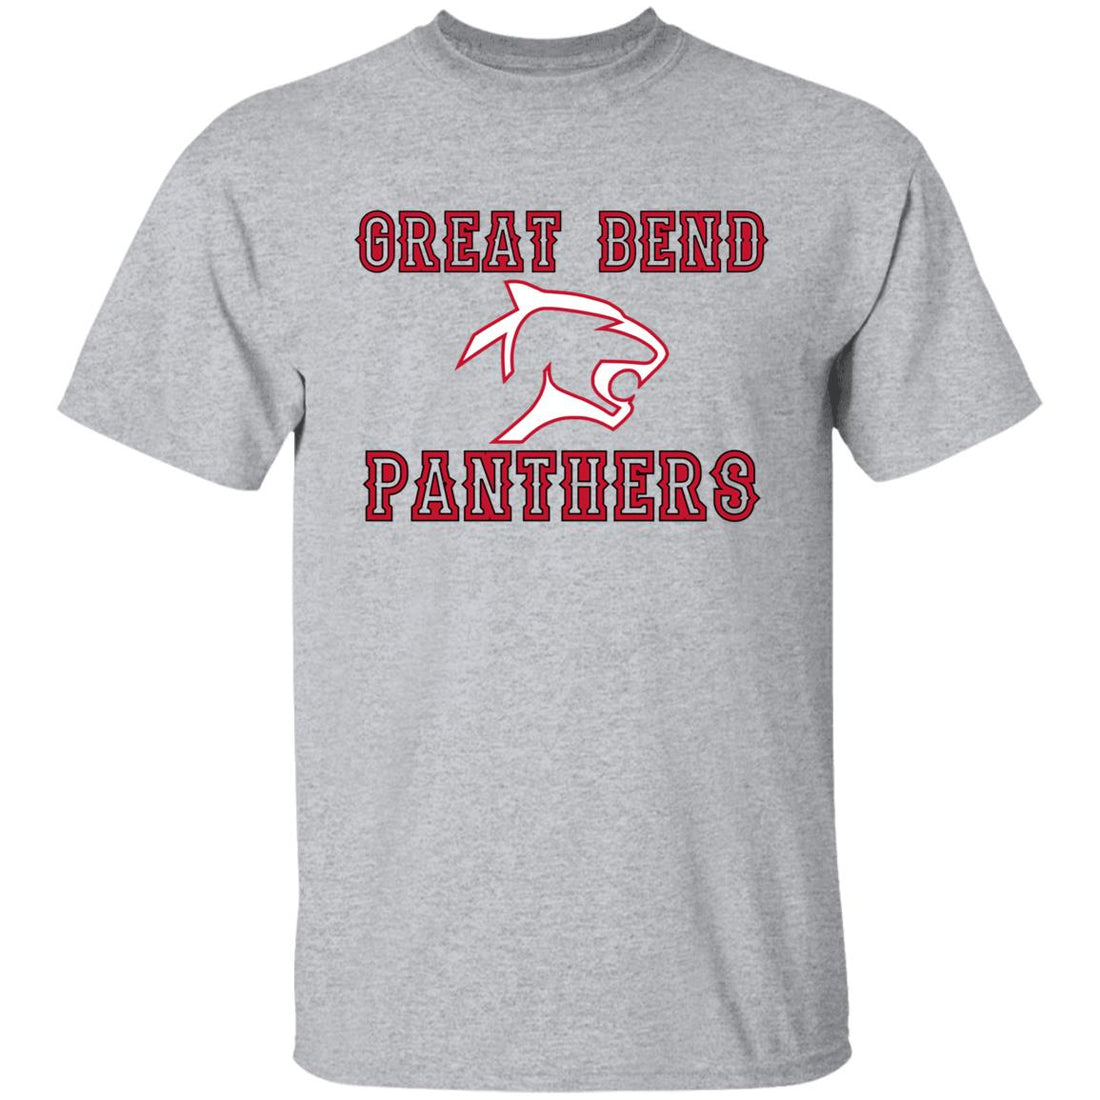 Youth Great Bend Panthers Tee - T-Shirts - Positively Sassy - Youth Great Bend Panthers Tee